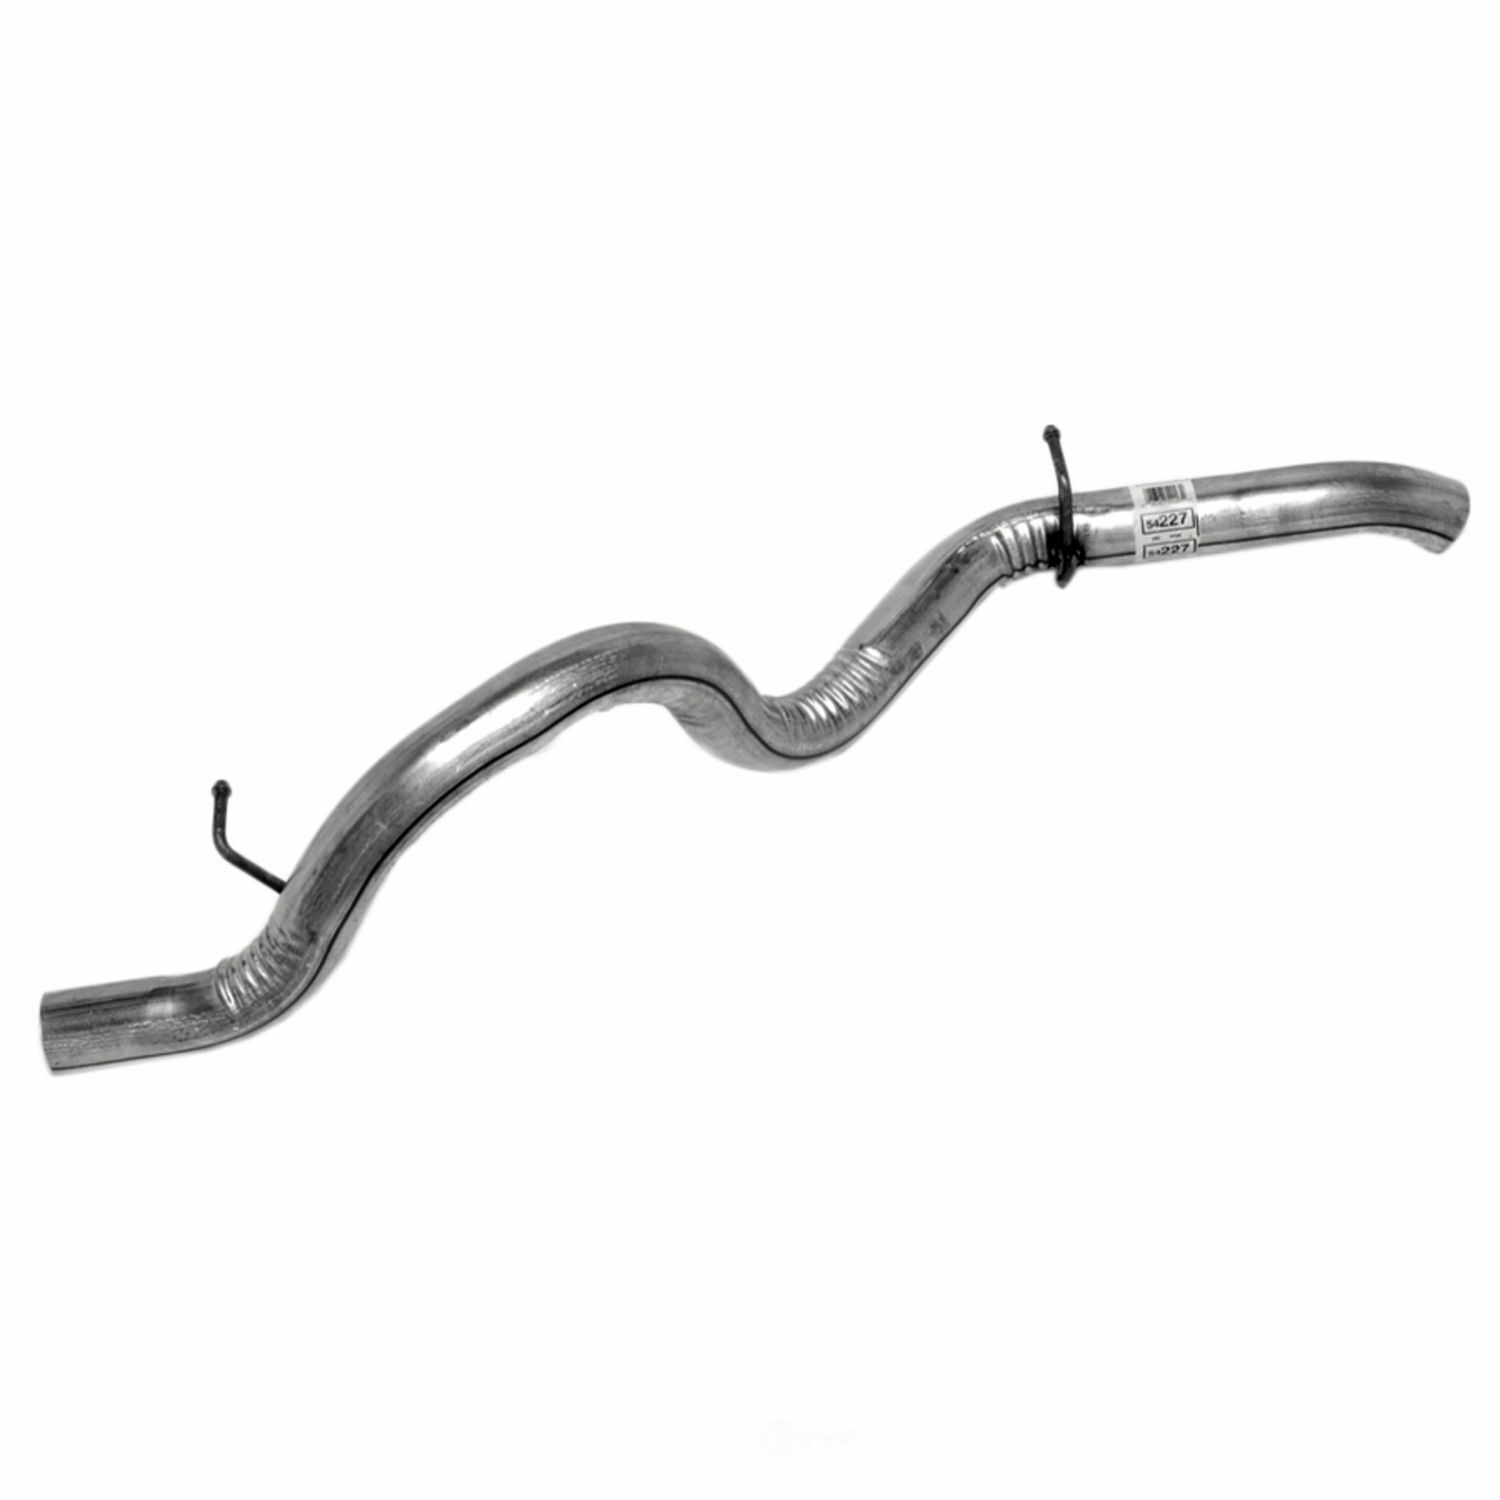 Exhaust Tail Pipe Walker 54227 fits 97-06 Jeep Wrangler 4.0L-L6